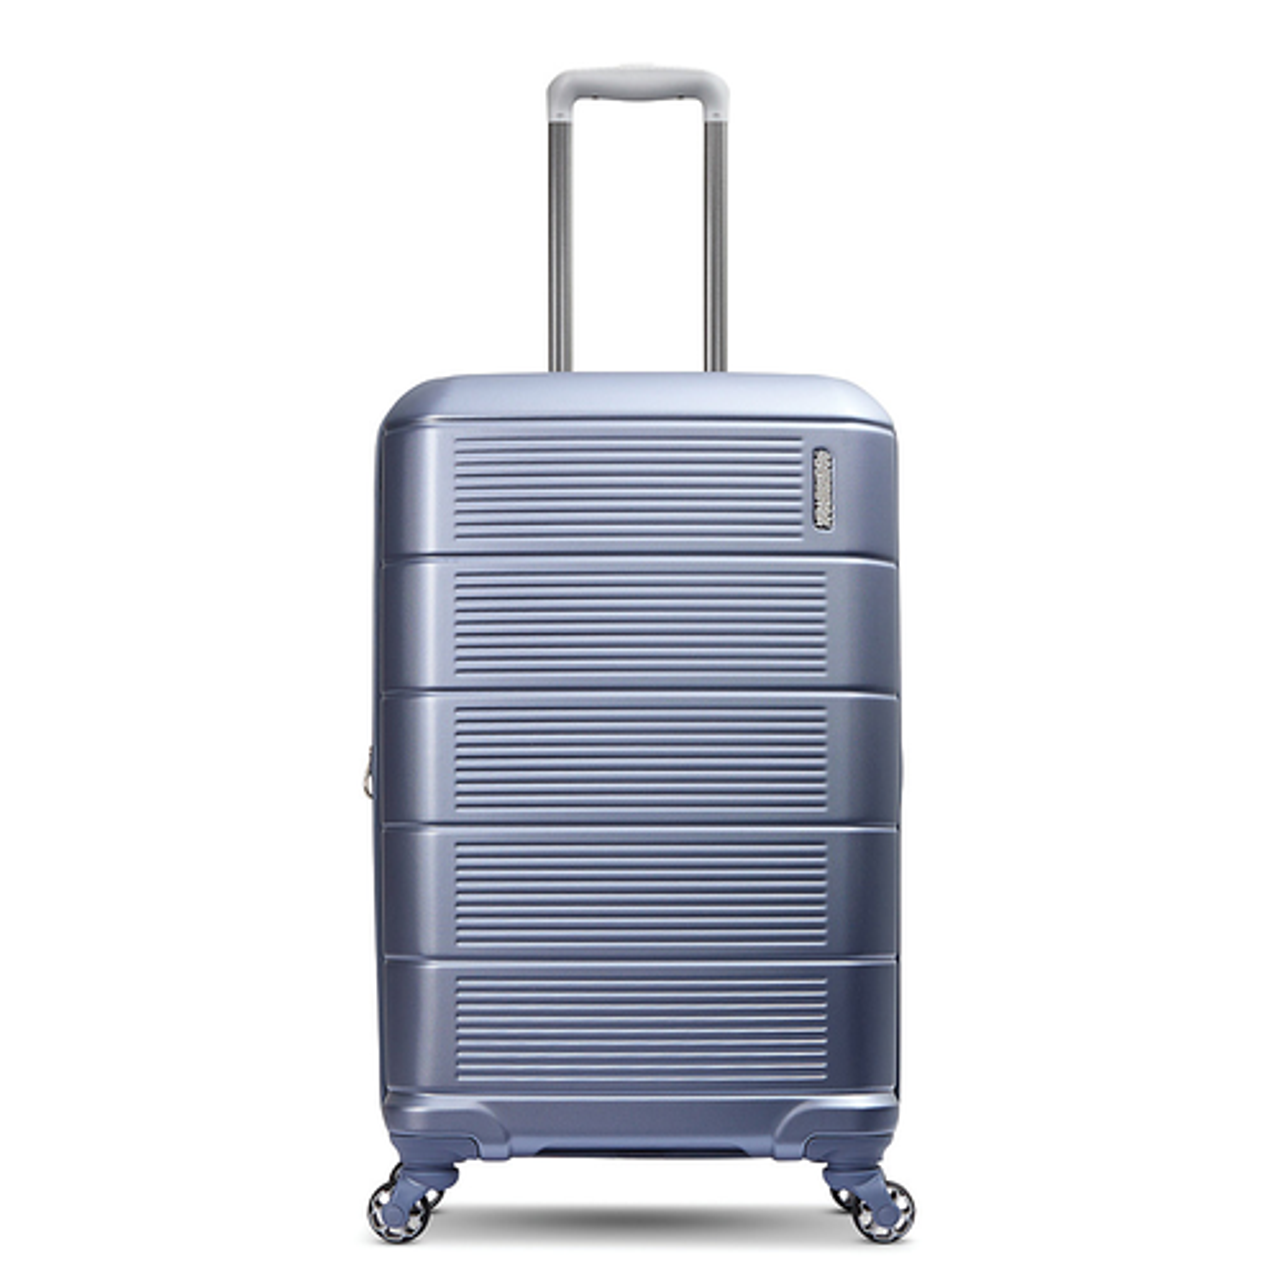 American Tourister - Stratum 2.0 24" Spinner Suitcase - Slate Blue